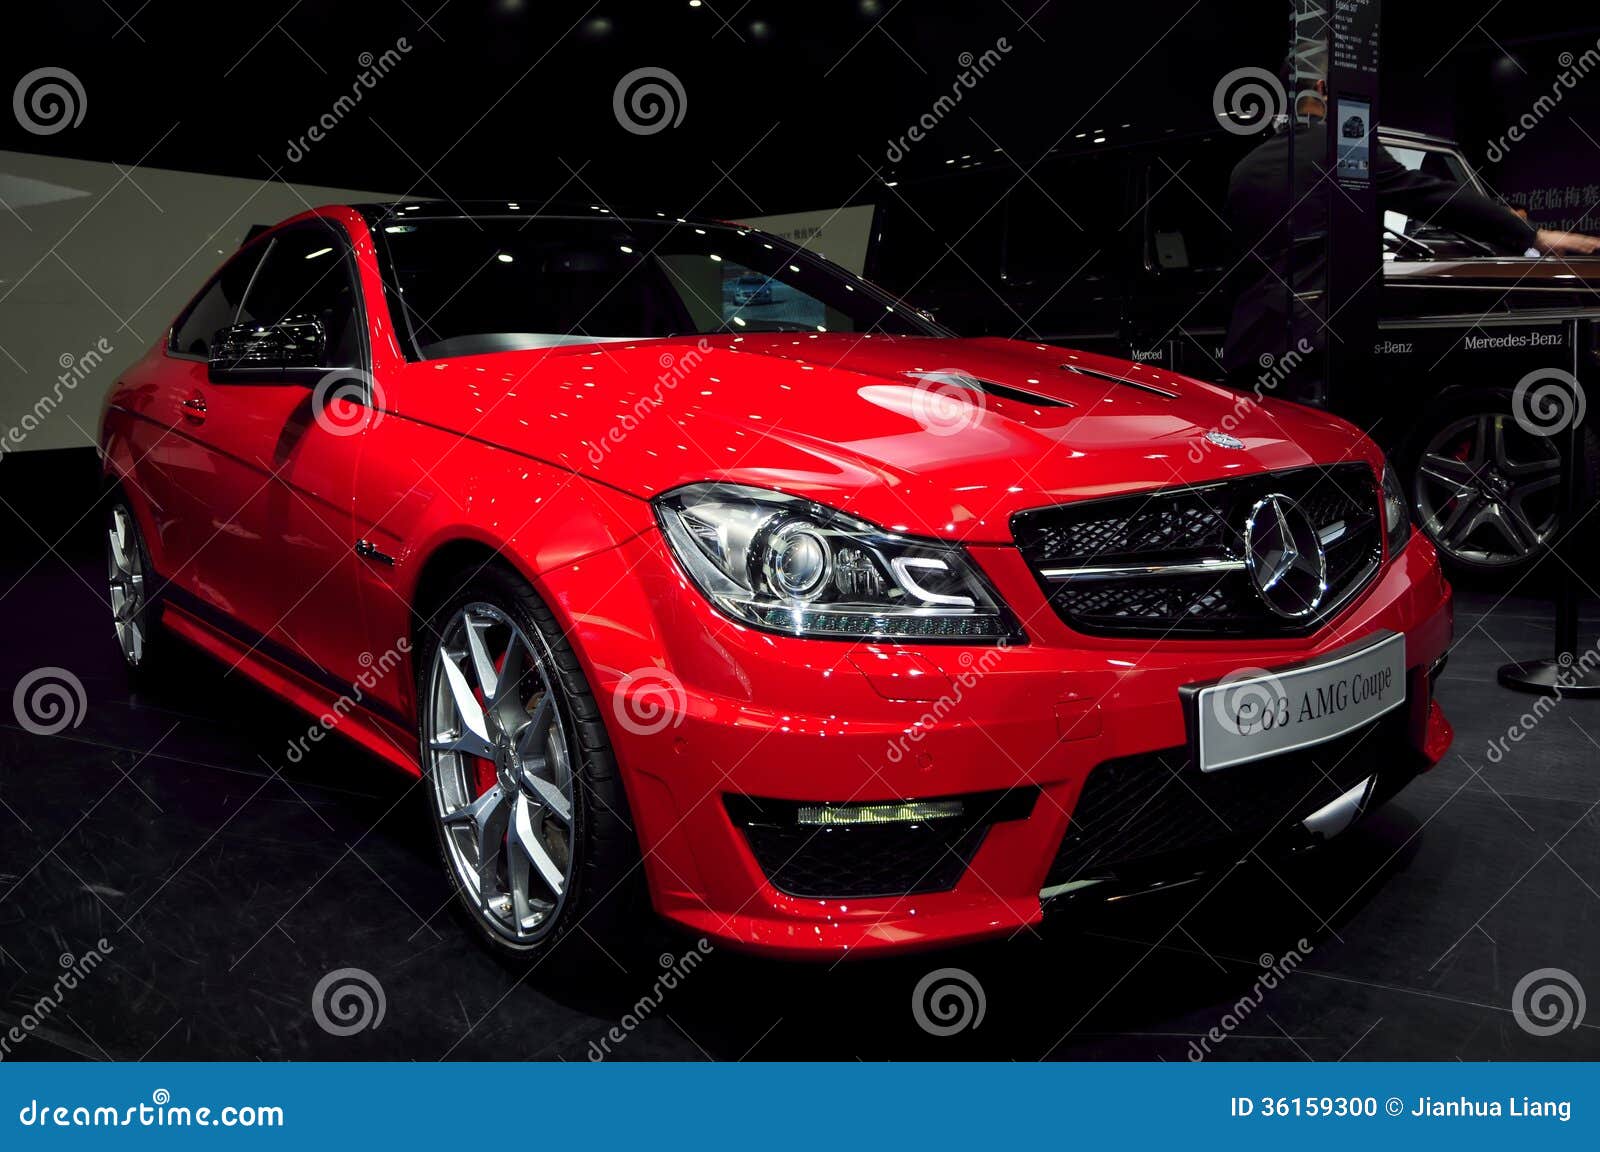 Mercedes Benz C63 Amg Coupe Black Series Editorial Image Image Of Vehicle Transportation